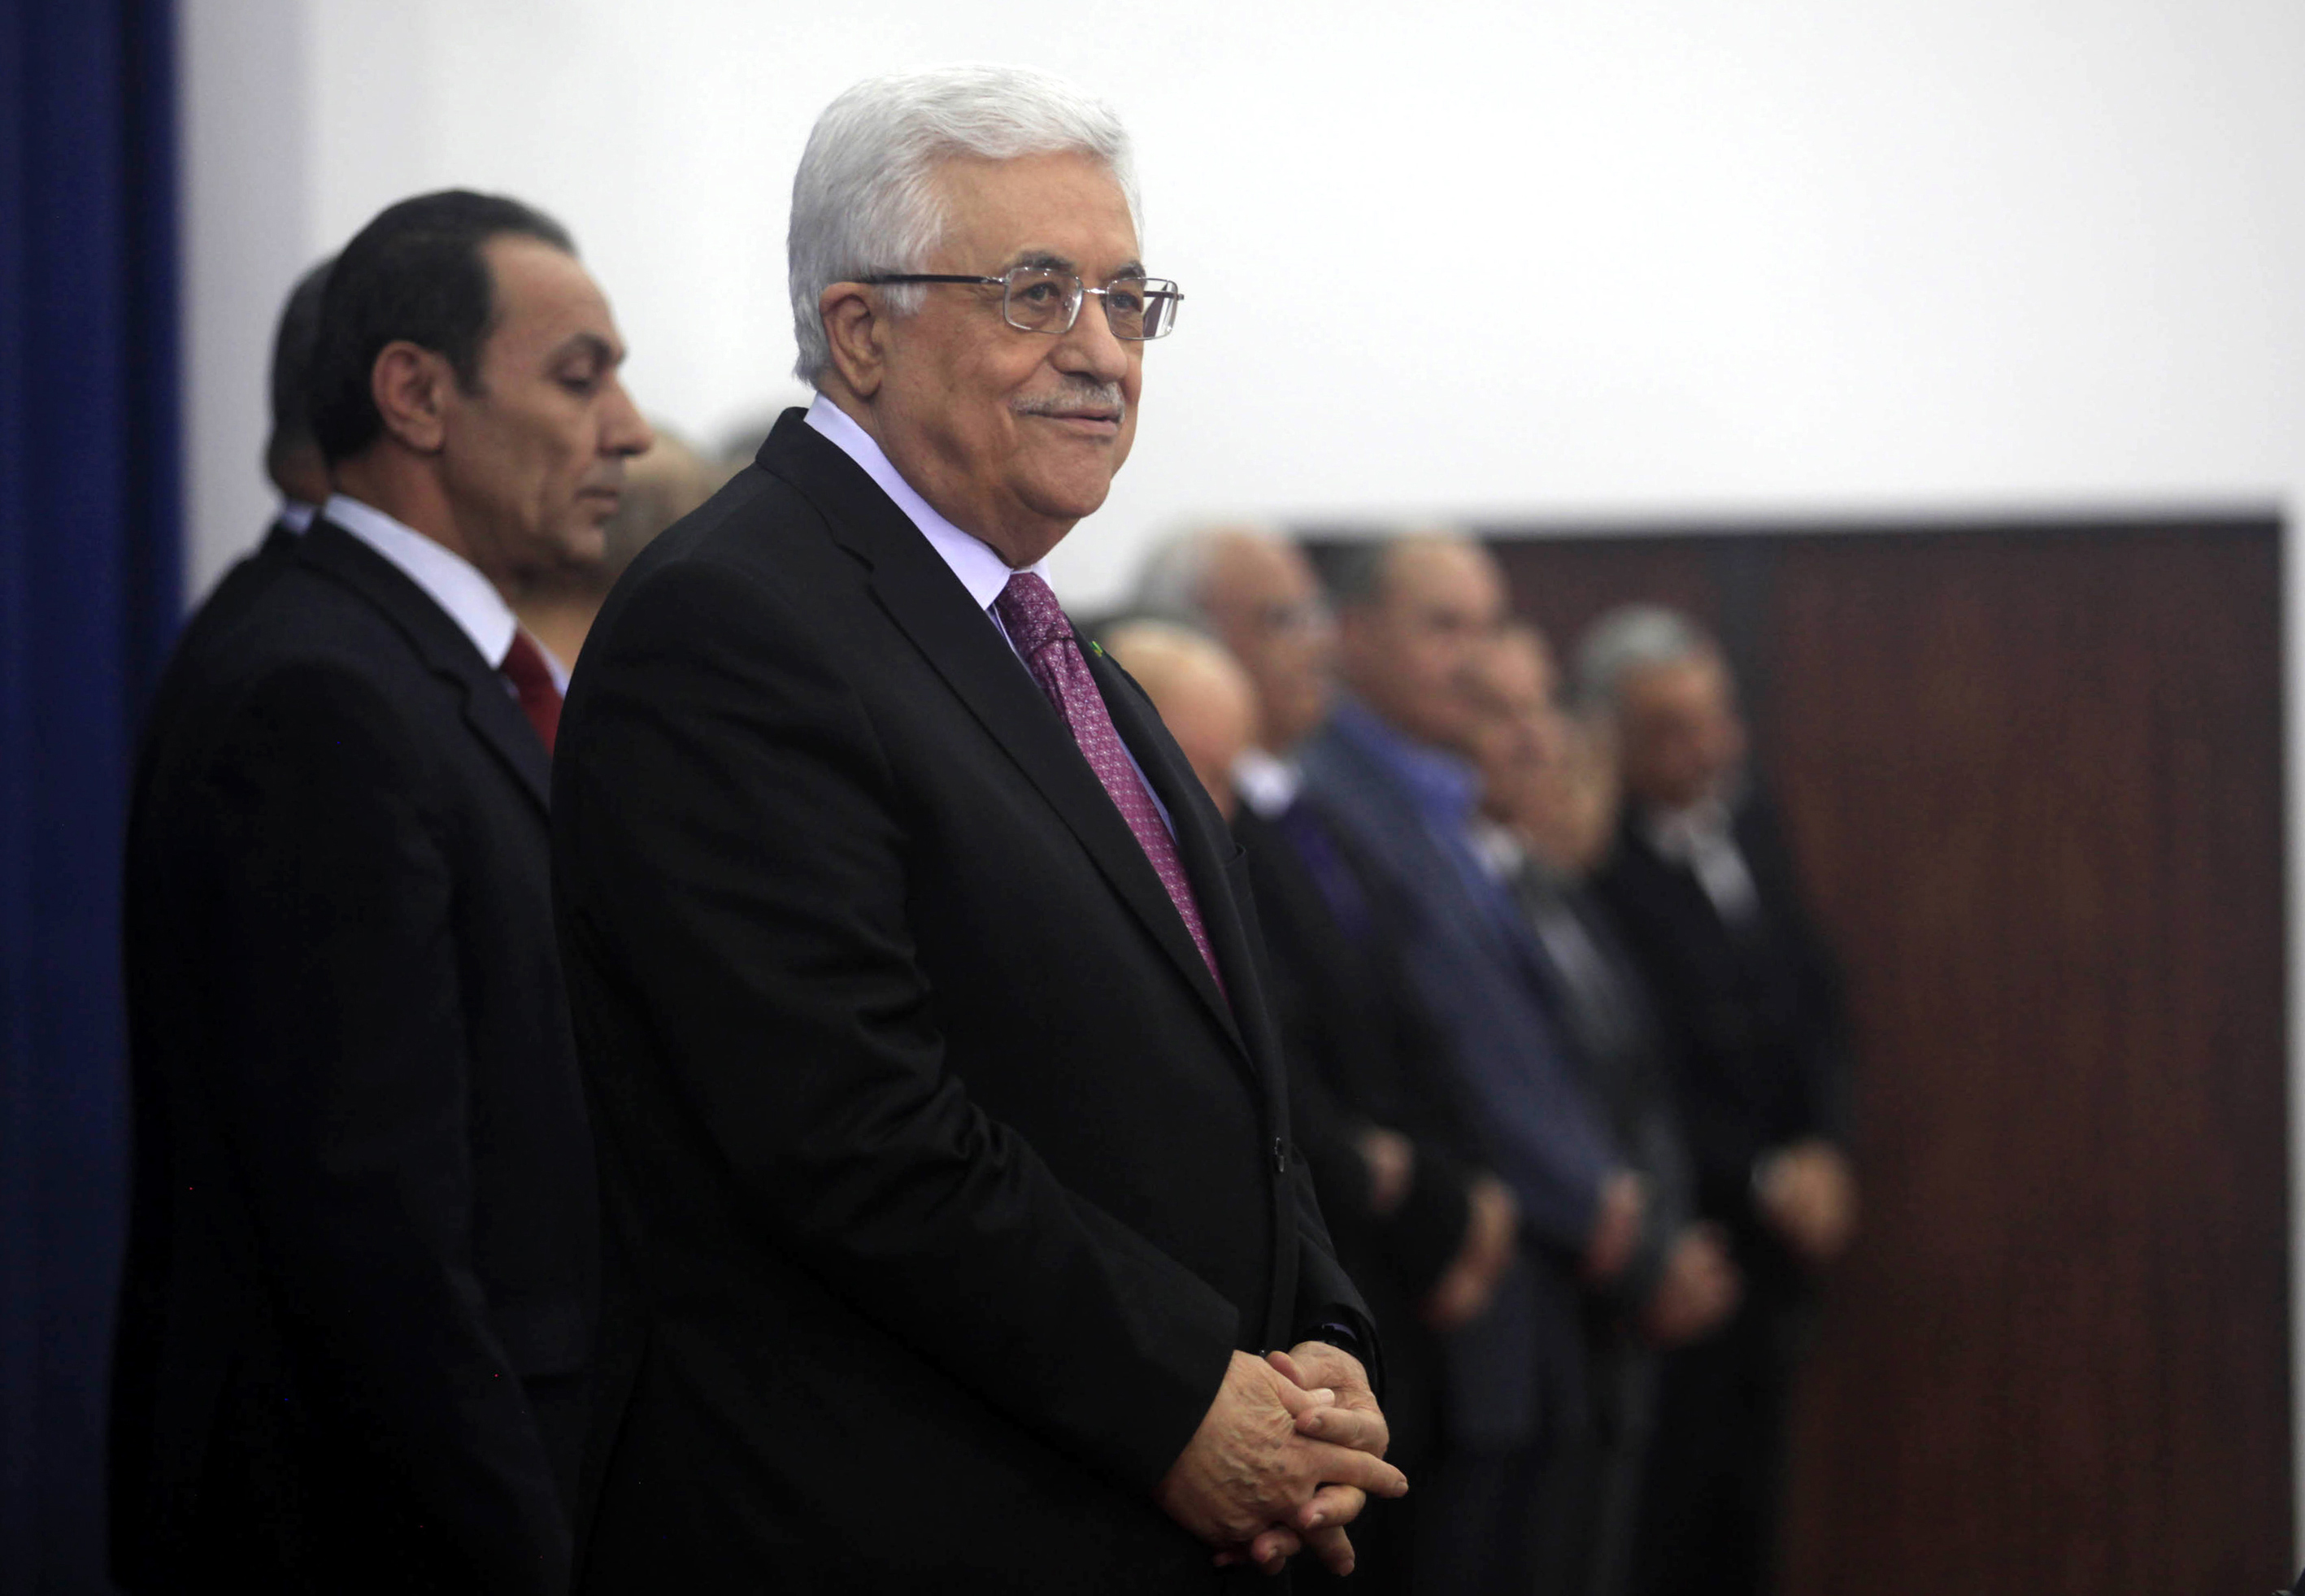 Palestinian President Mahmoud Abbas attends the swearing-in ceremony with the new unity government  in the West Bank town of Ramallah on June 02, 2014. (Issam Rimawi—Anadolu Agency/Getty Images)